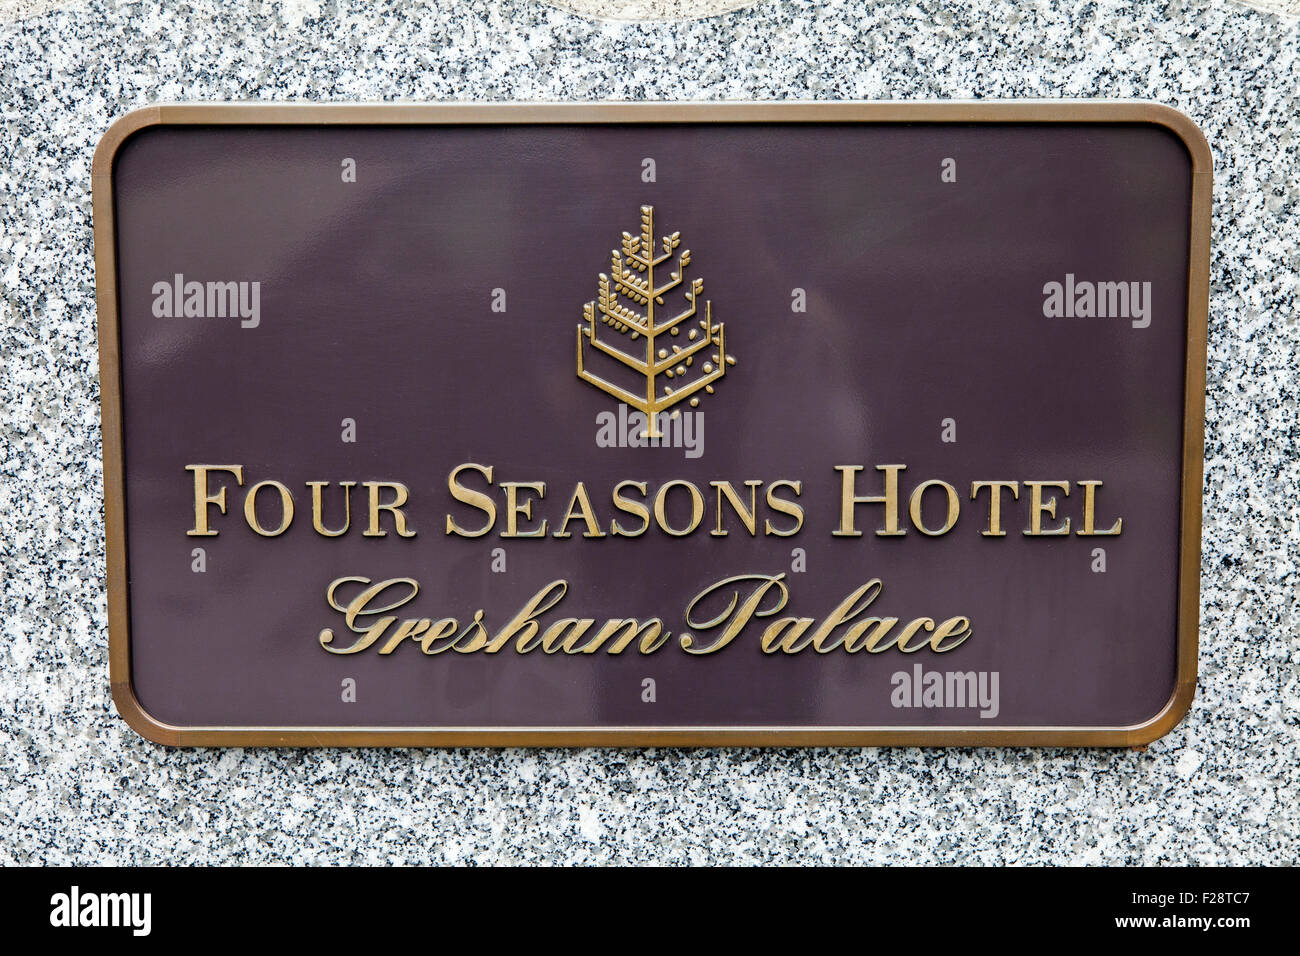 BUDAPEST, HUNGARY - AUGUST 19TH 2015: The sign for the luxury Four Seasons Hotel in Budapest, on the 19th August 2015. Stock Photo